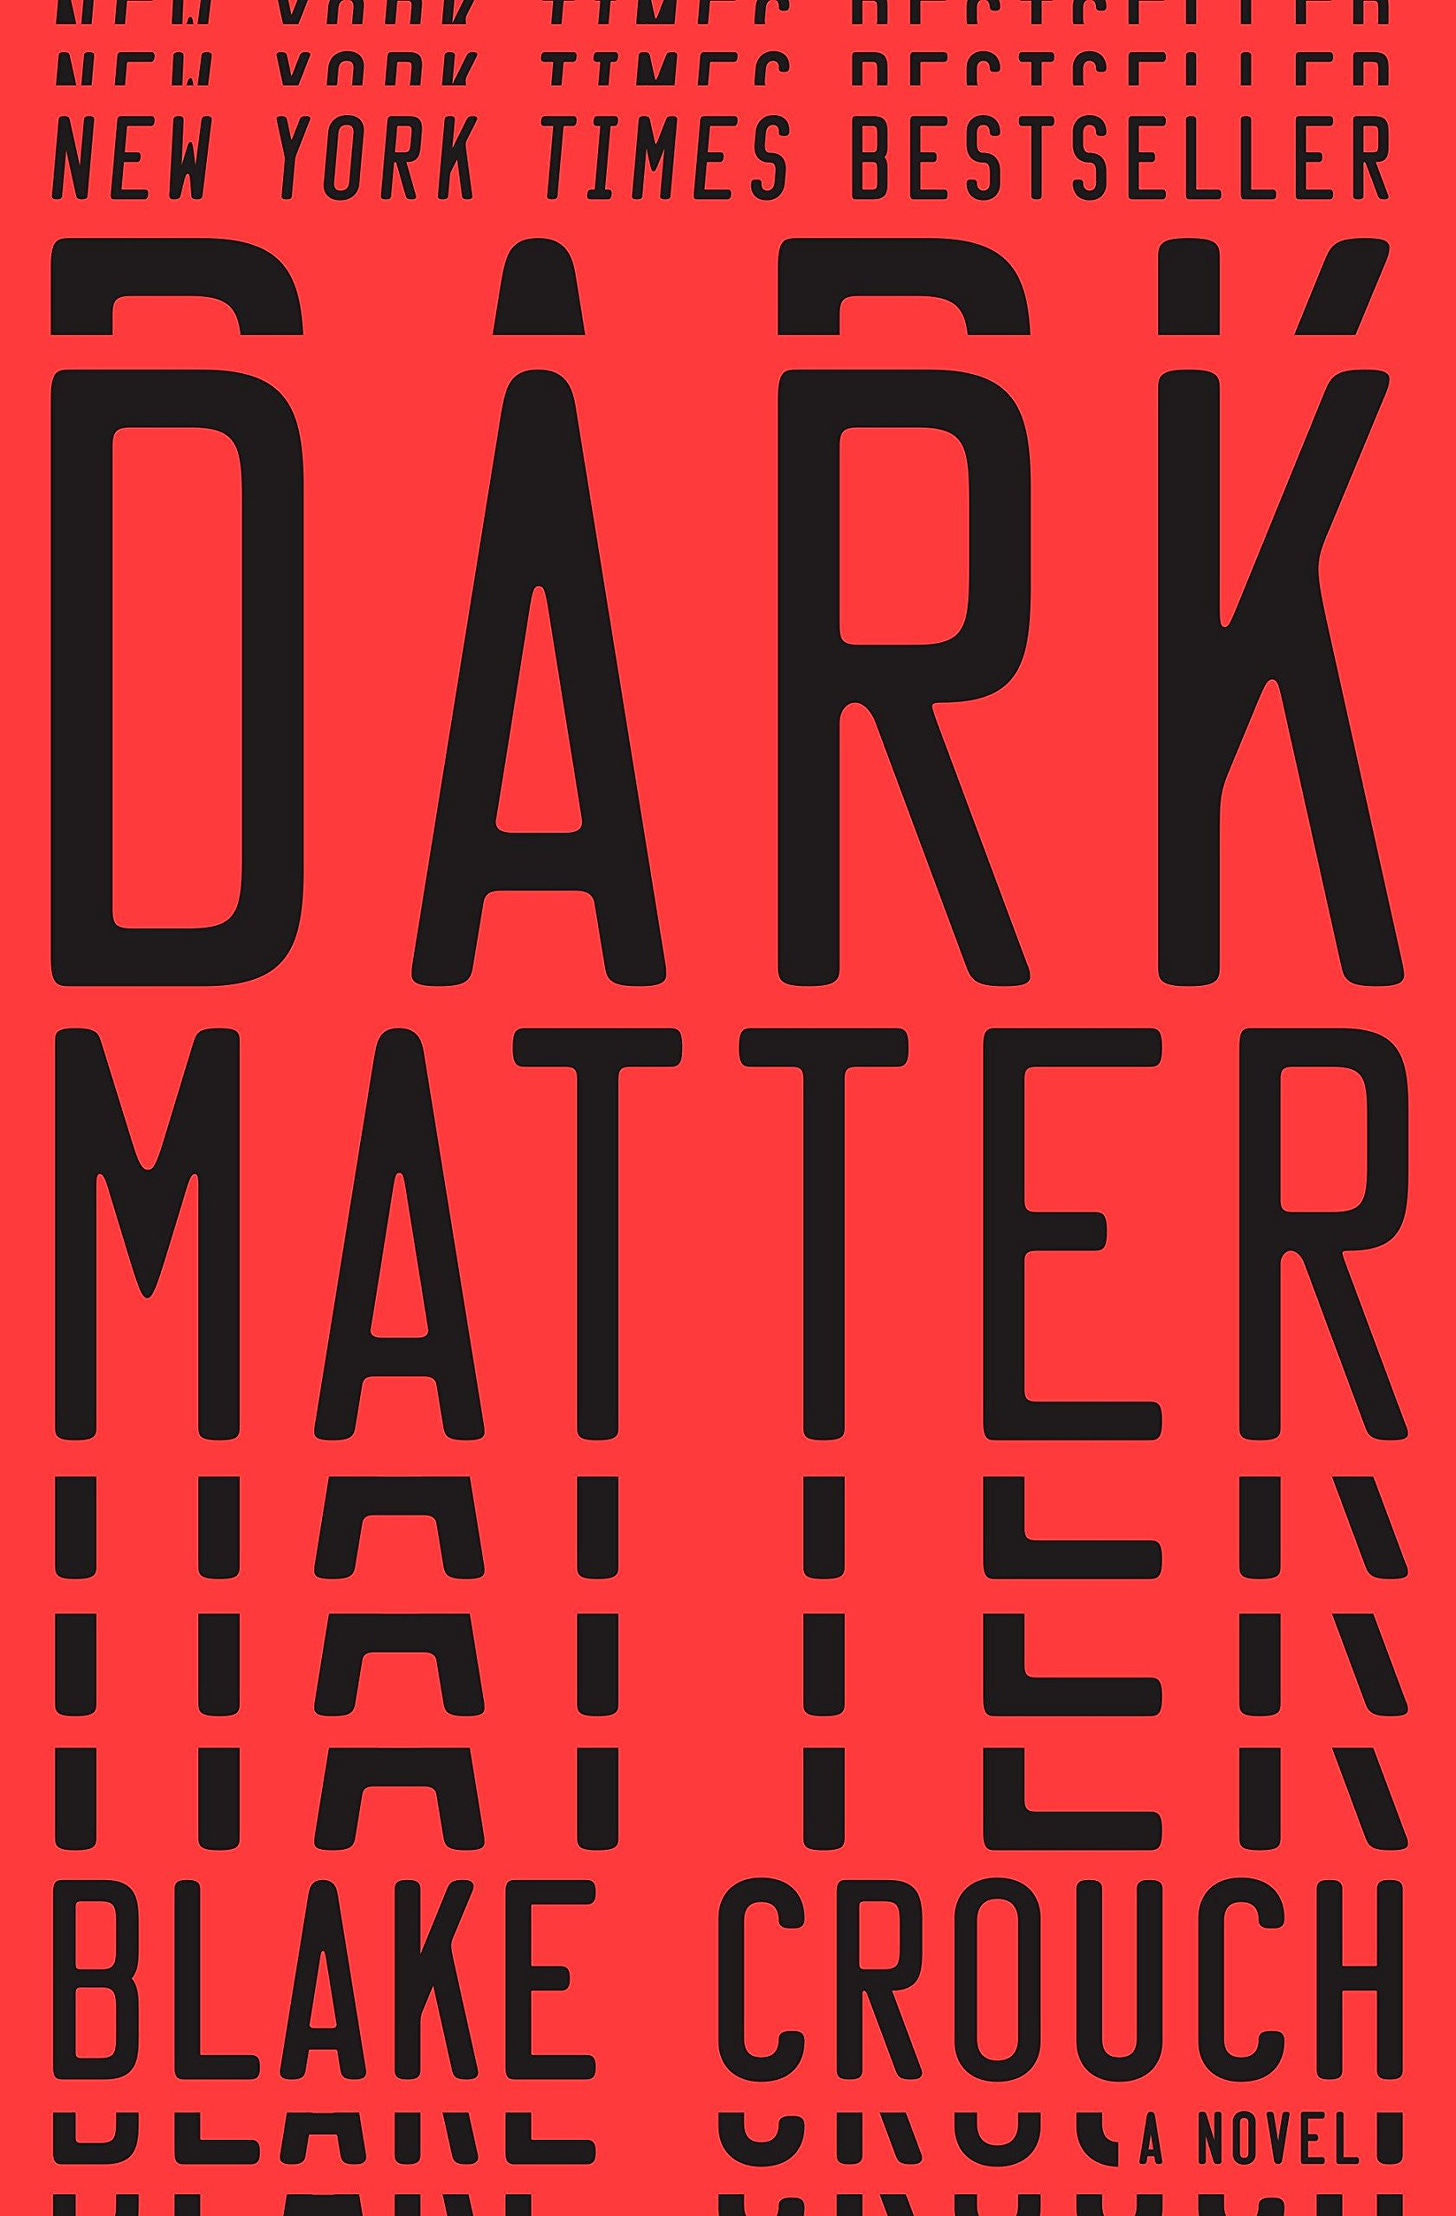 Buy Dark Matter: A Novel Book Online at Low Prices in India | Dark Matter:  A Novel Reviews & Ratings - Amazon.in